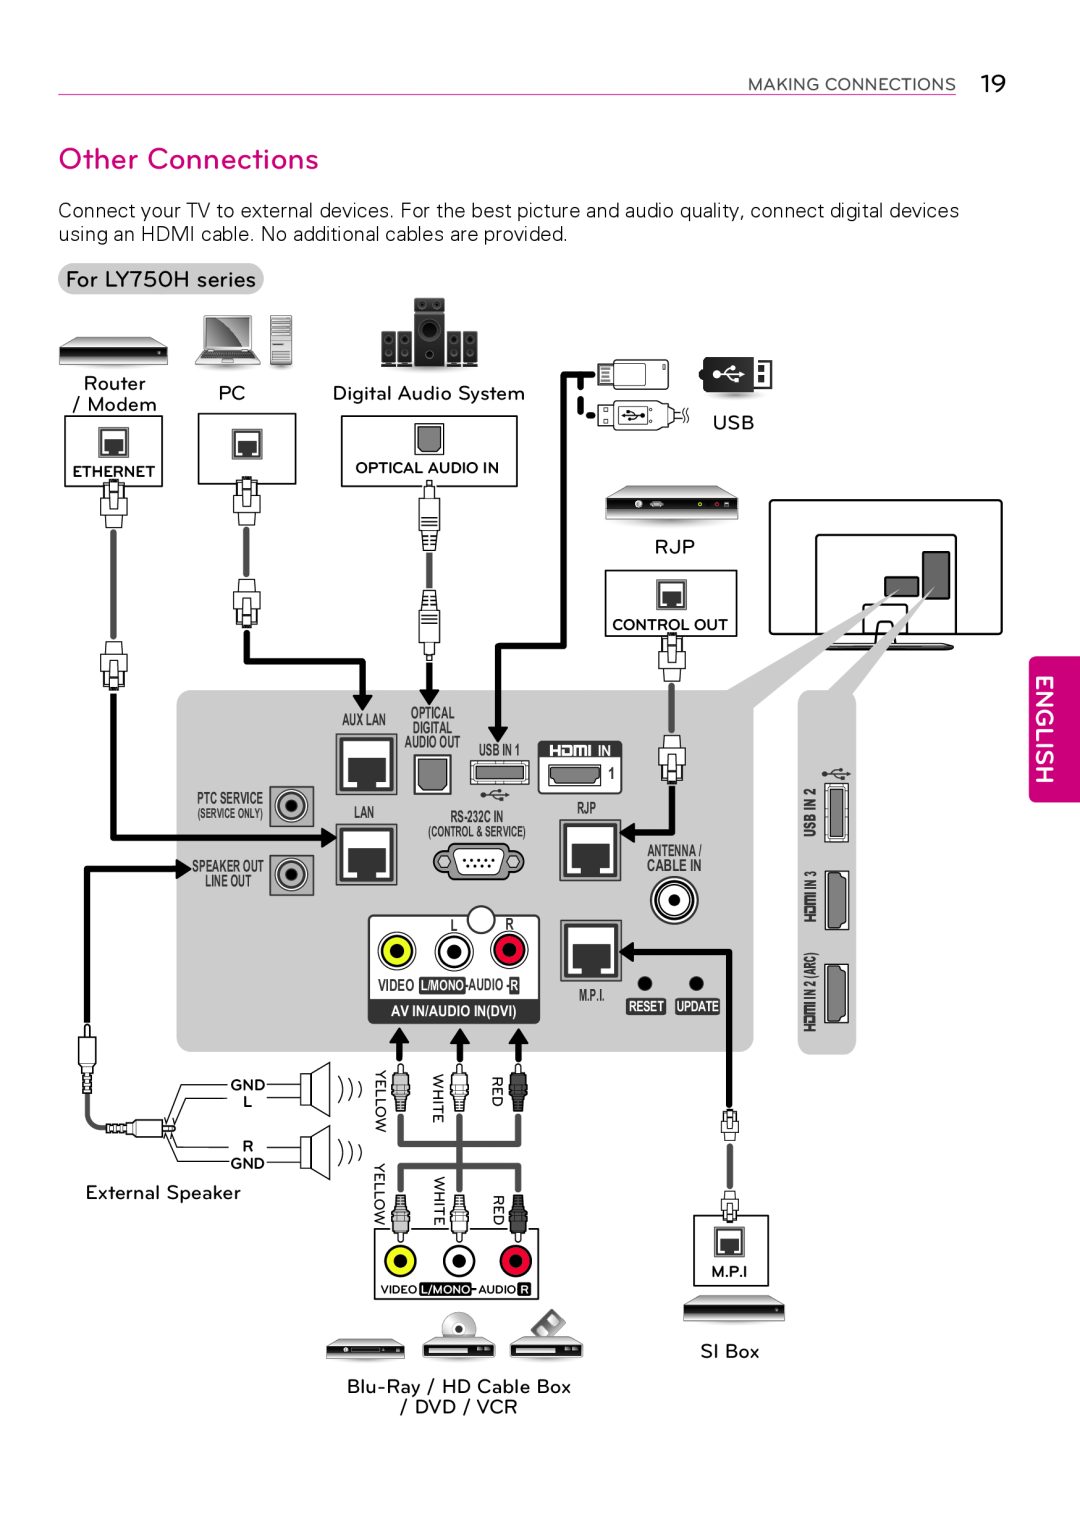 LG Electronics 55LY760H, 32LY750H, 55LY750H, 42LY750H, 47LY750H, 39LY750H Other Connections, For LY750H series, English 